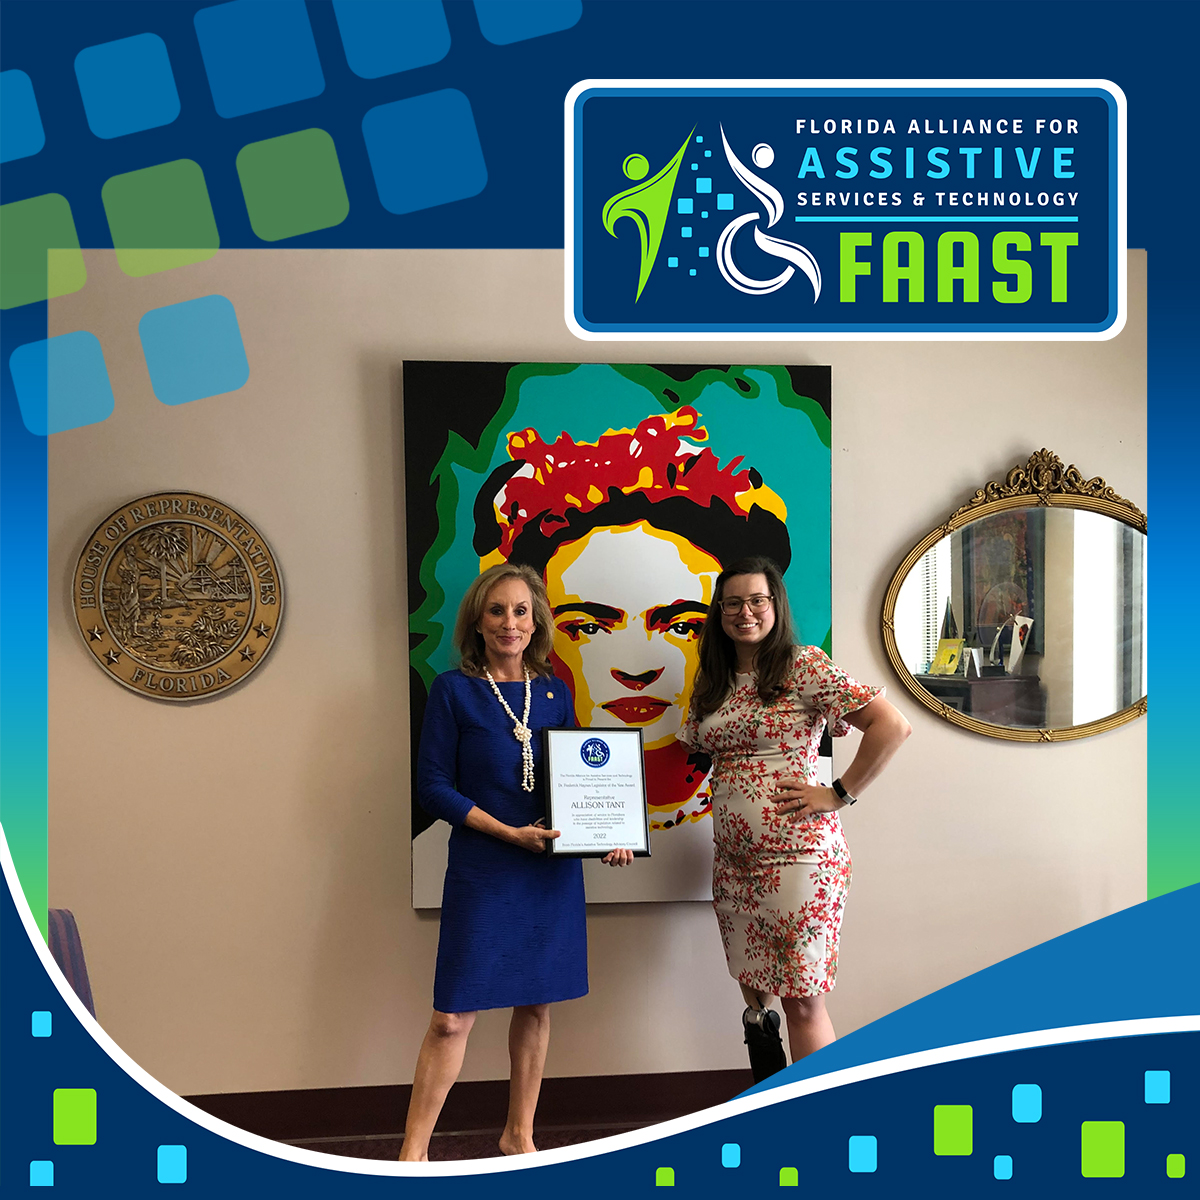 Representative Allison Tant shown with her Legislator of the Year Award with Whitney Doyle surrounded by a blue graphic including the FAAST logo